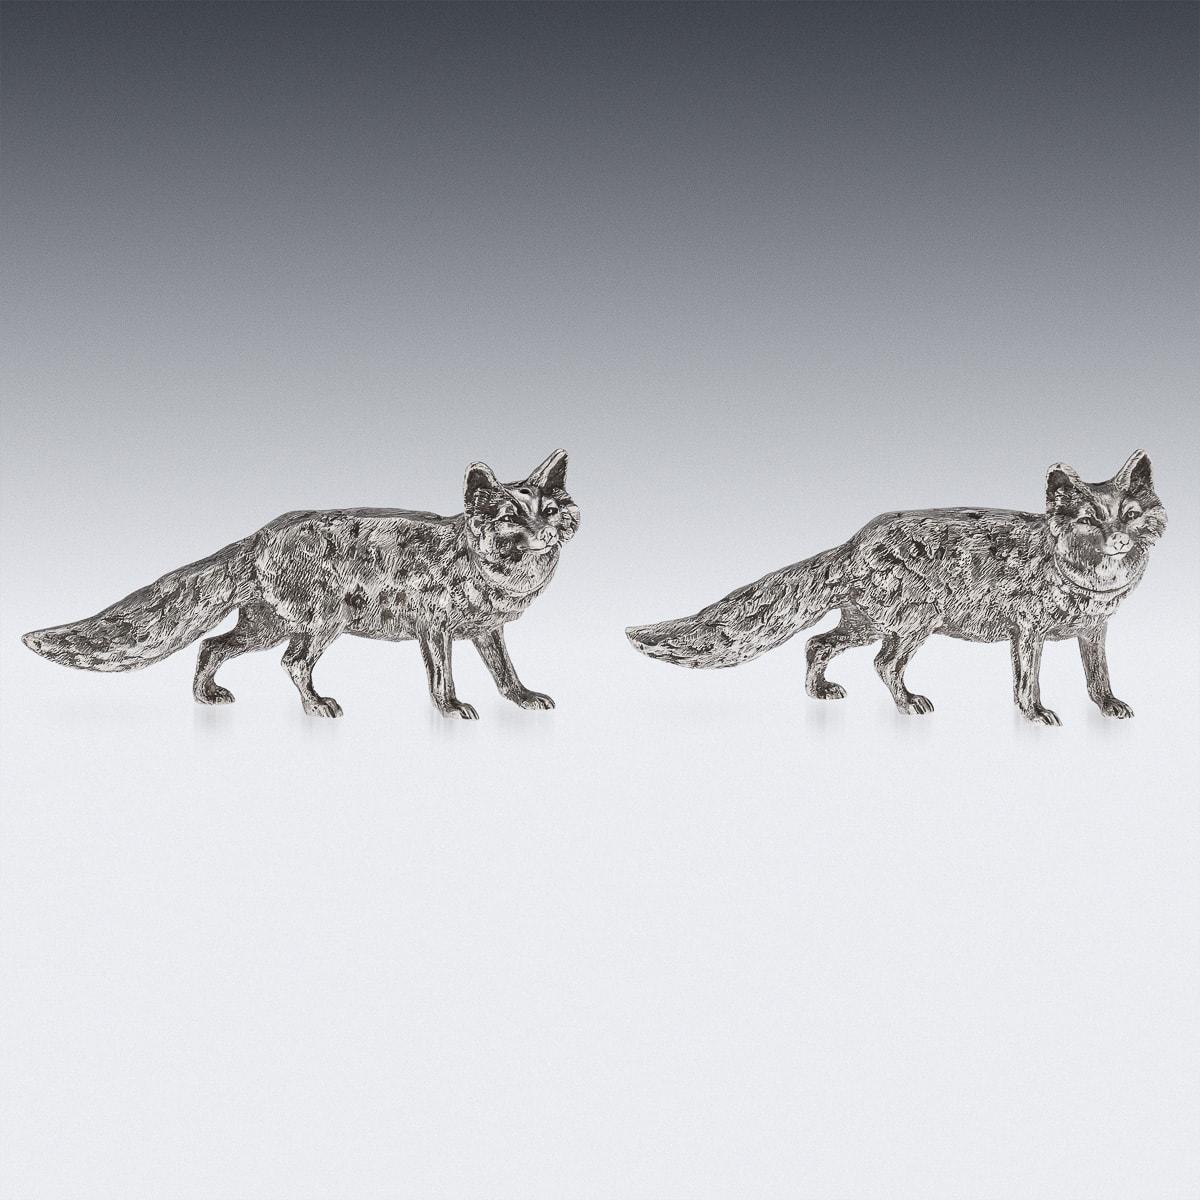 Novelty 20th Century very rare solid silver pair of novelty salt & pepper, each beautifully cast and realistically modelled as prowling foxes, the body cast with a detailed textured fur, detachable heads. Hallmarked English silver (925 standard),